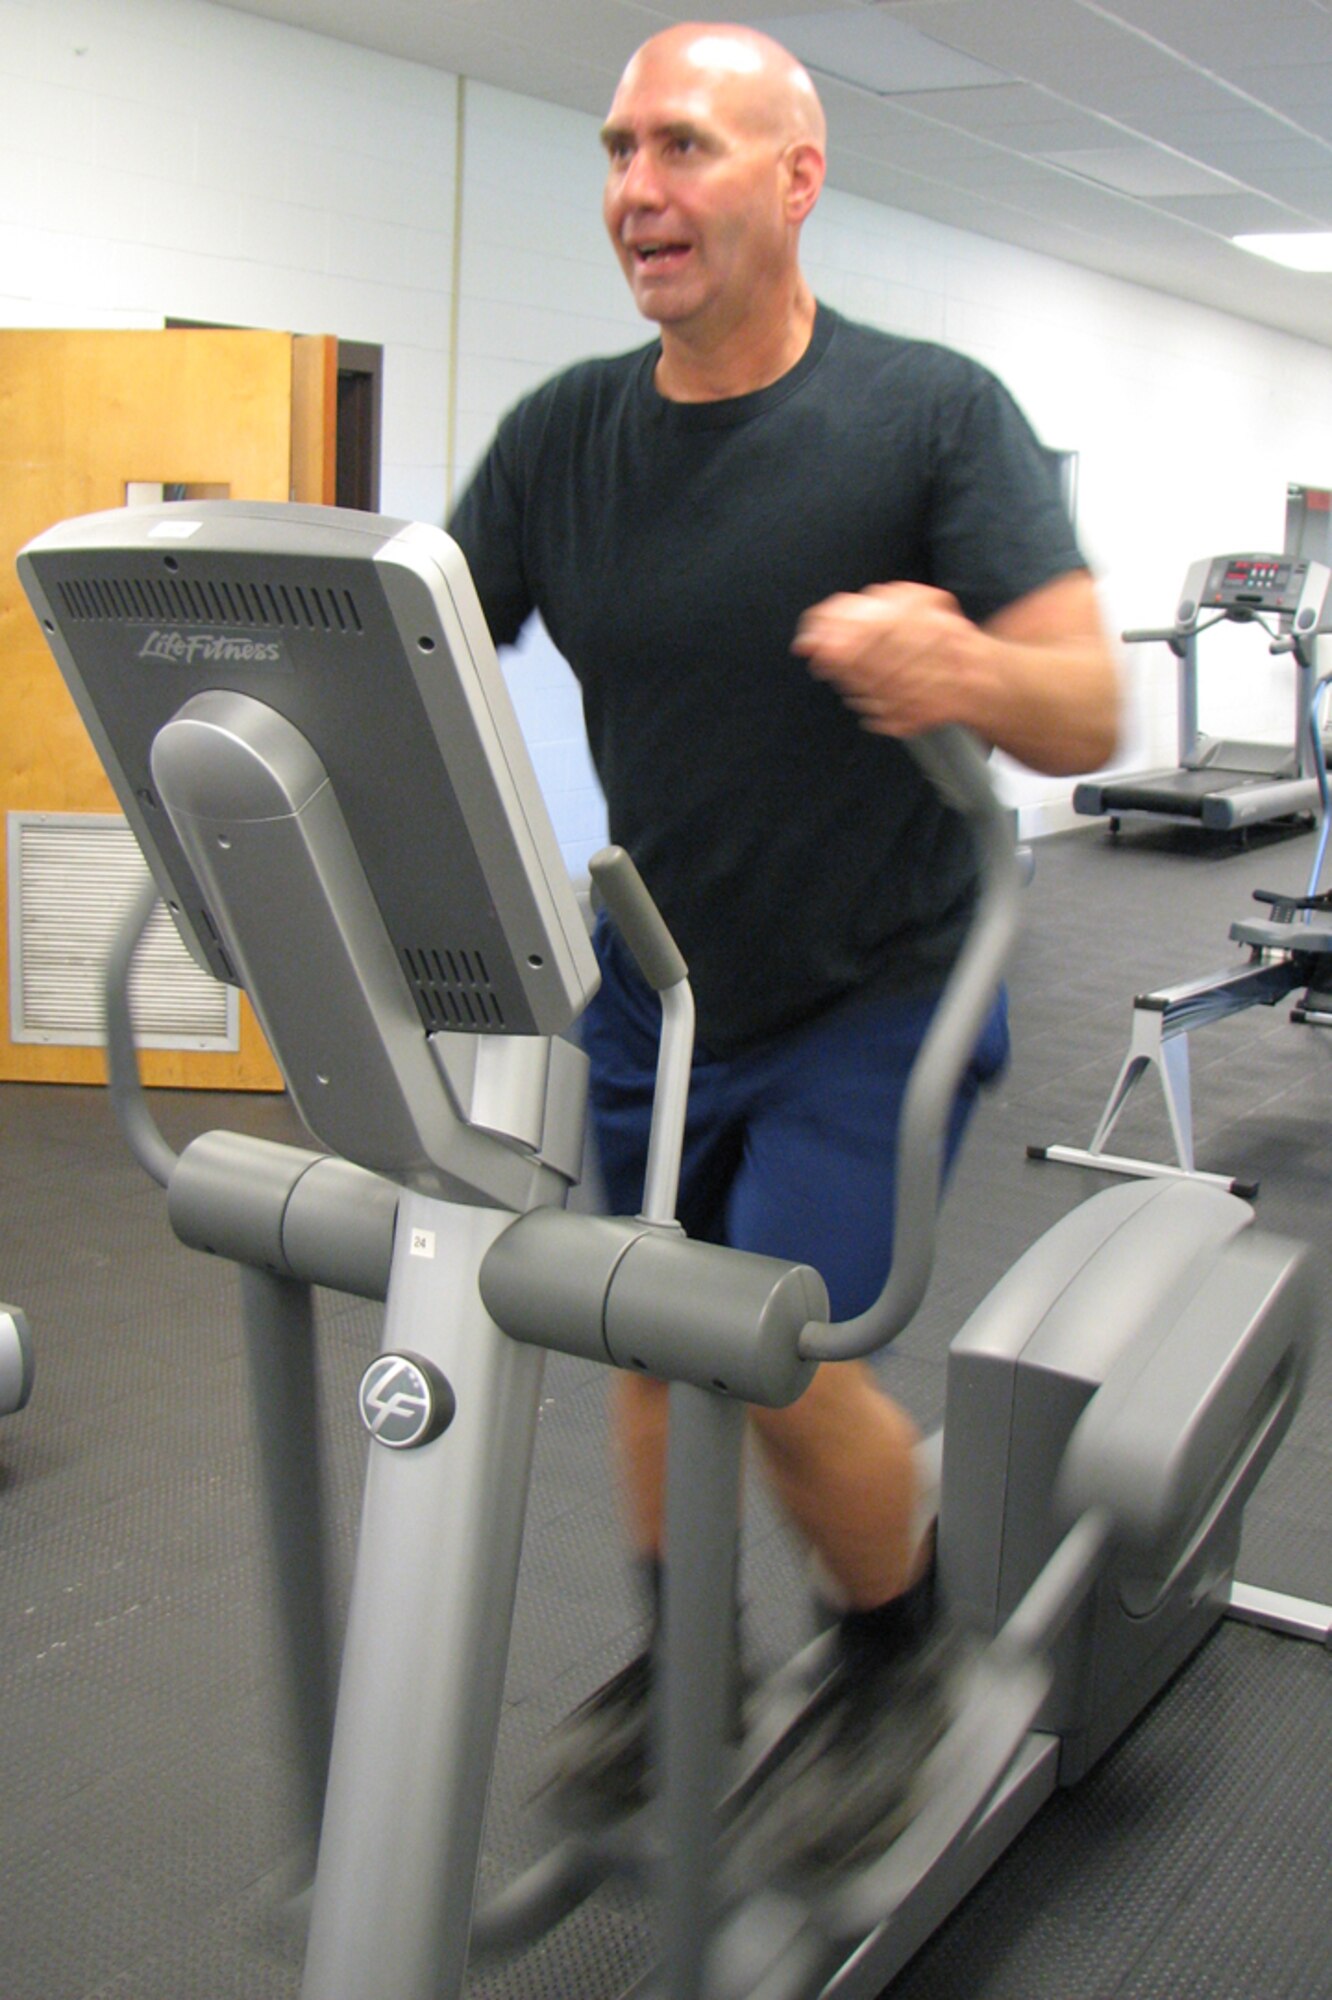 Ken Hemshrot, NEADS Emergency Manager, works out on an elliptical machine at the Fitness Center. He was crowned the “Biggest Loser” after dropping 51 pounds which represented a total percent weight loss of 20 percent (Photo by Maj. Leo Devine). 